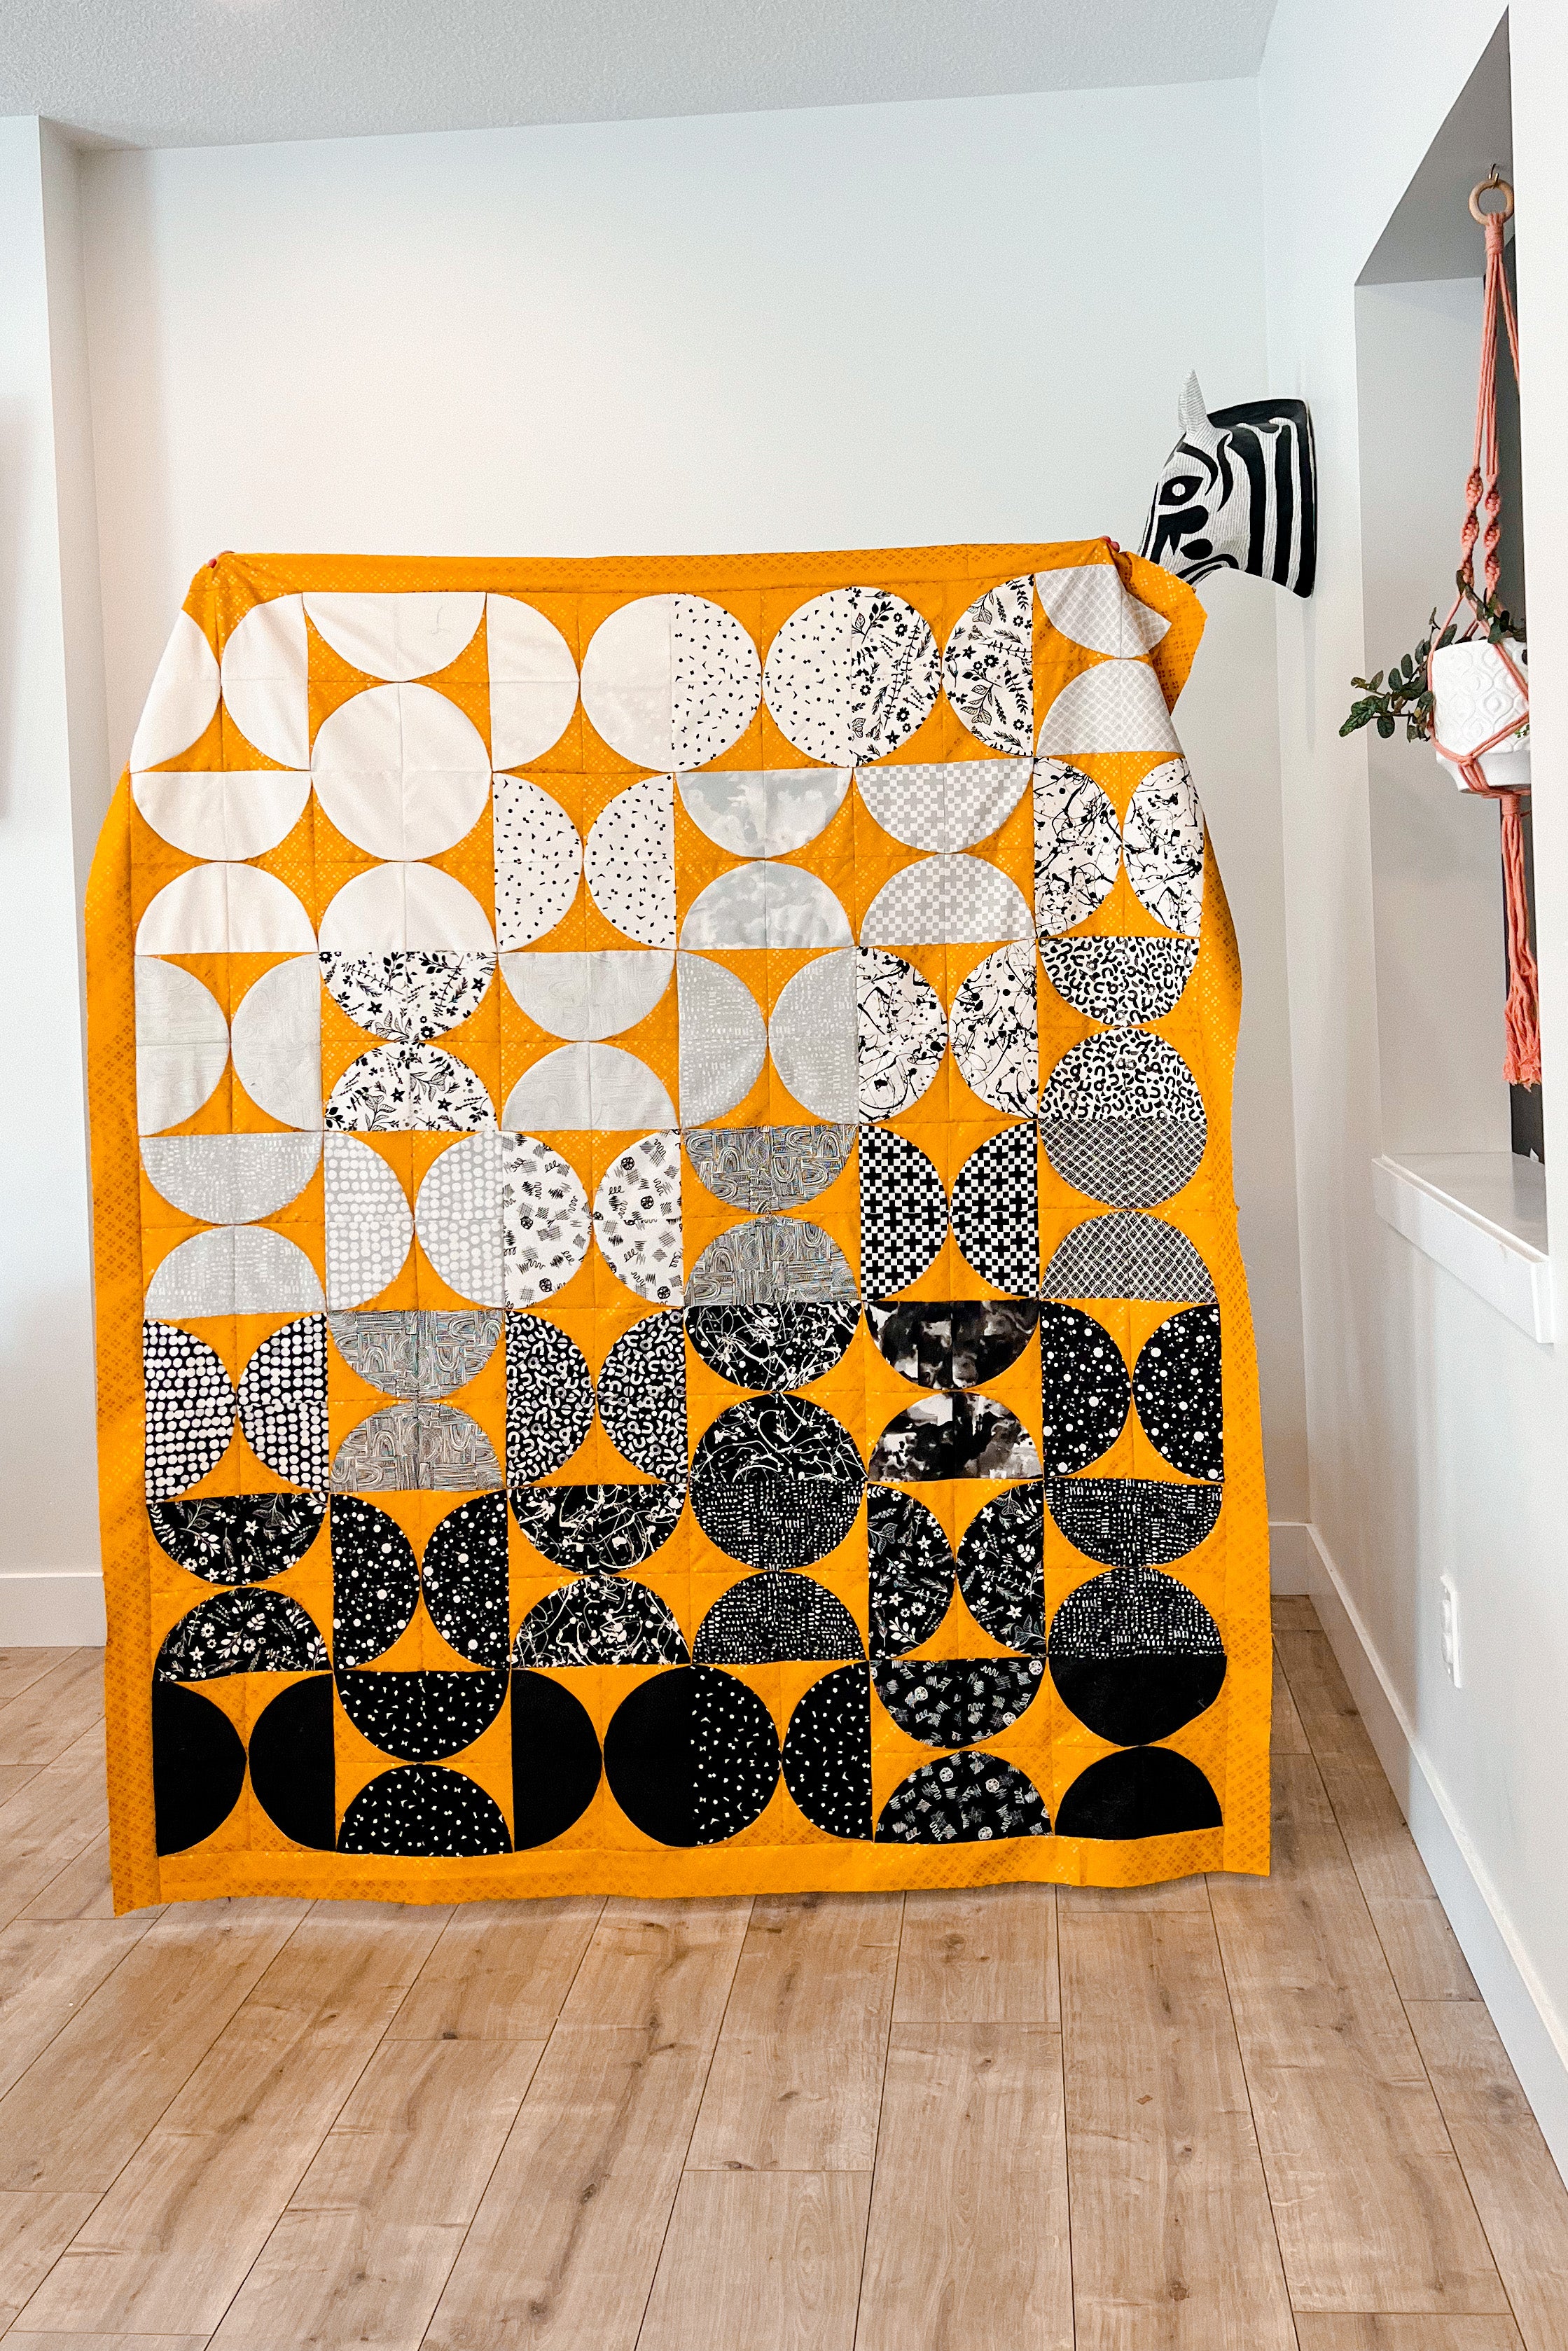 Reverie Quilt made by Amy. A modern quilt design with curved piecing perfect for quilters of all levels, even beginners.